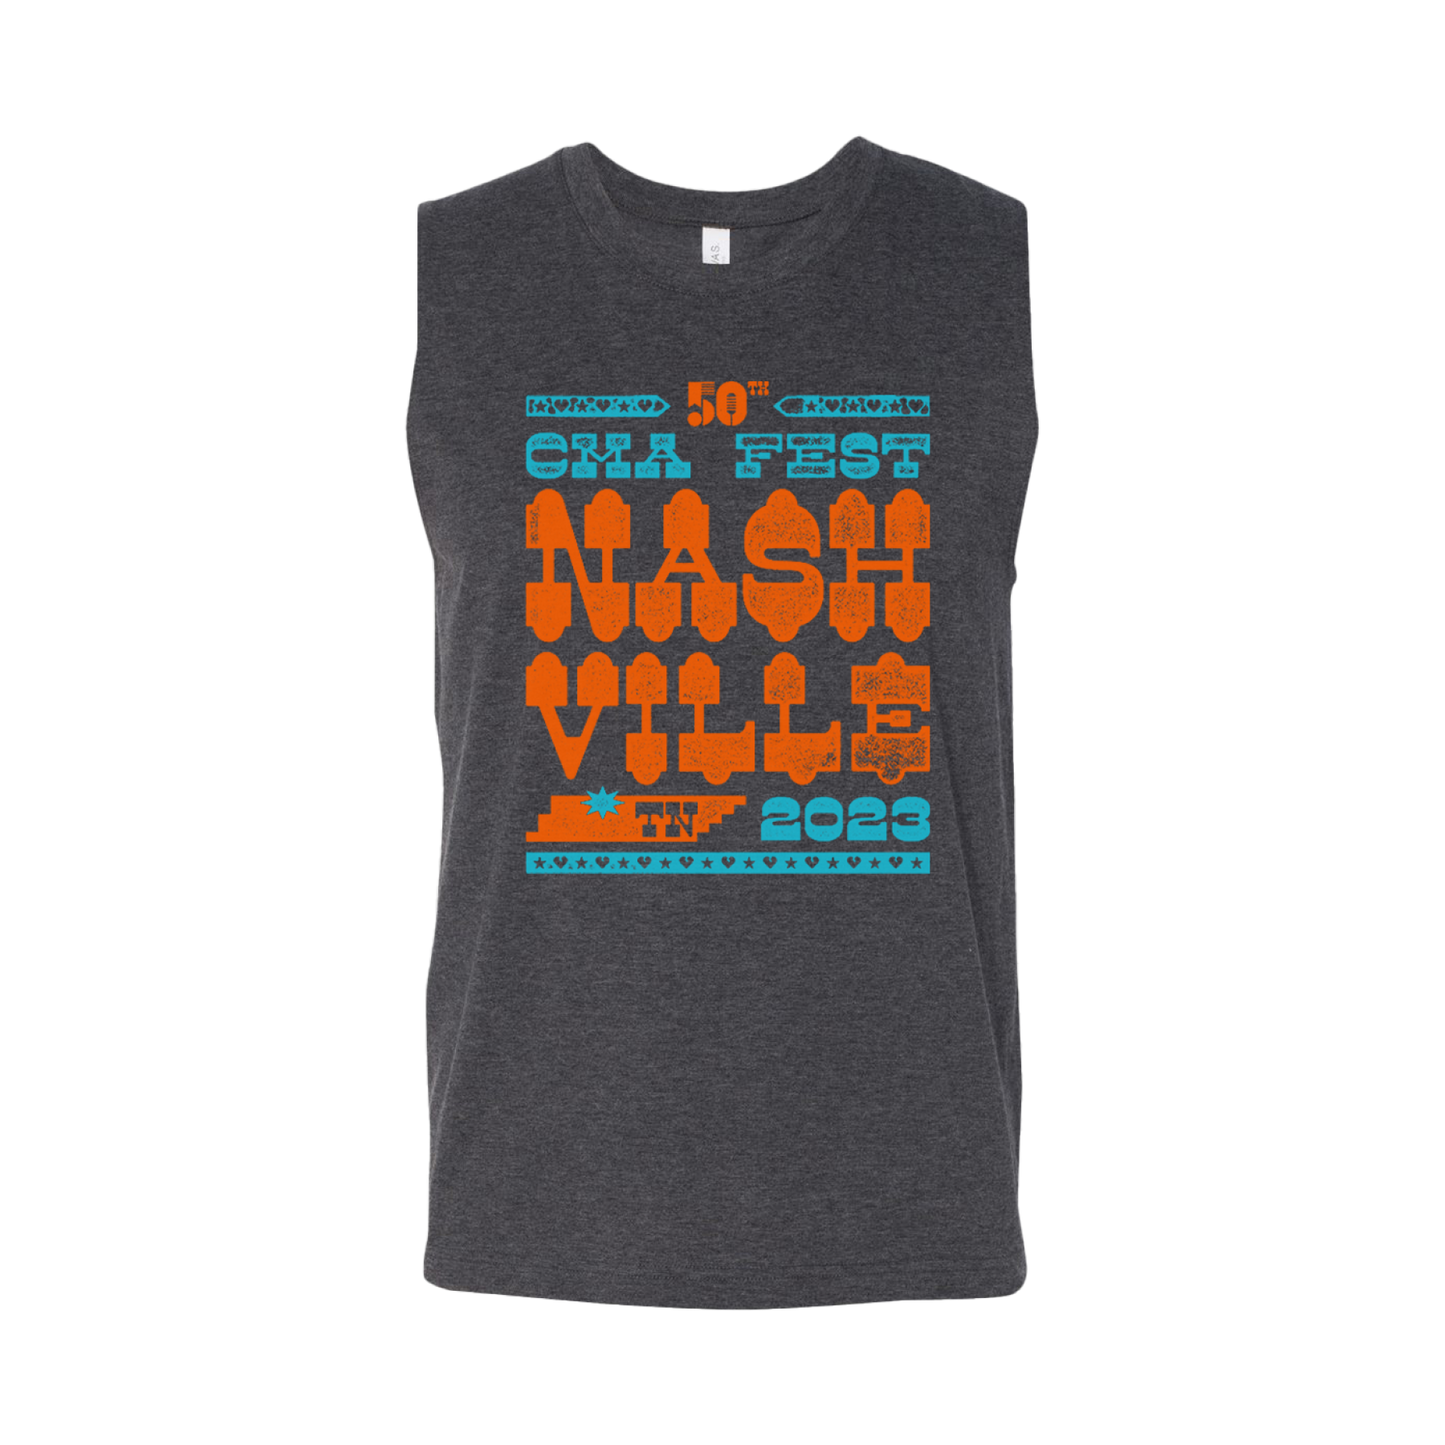 Official CMA Fest Merchandise. Poster design printed on a grey unisex muscle tank. 